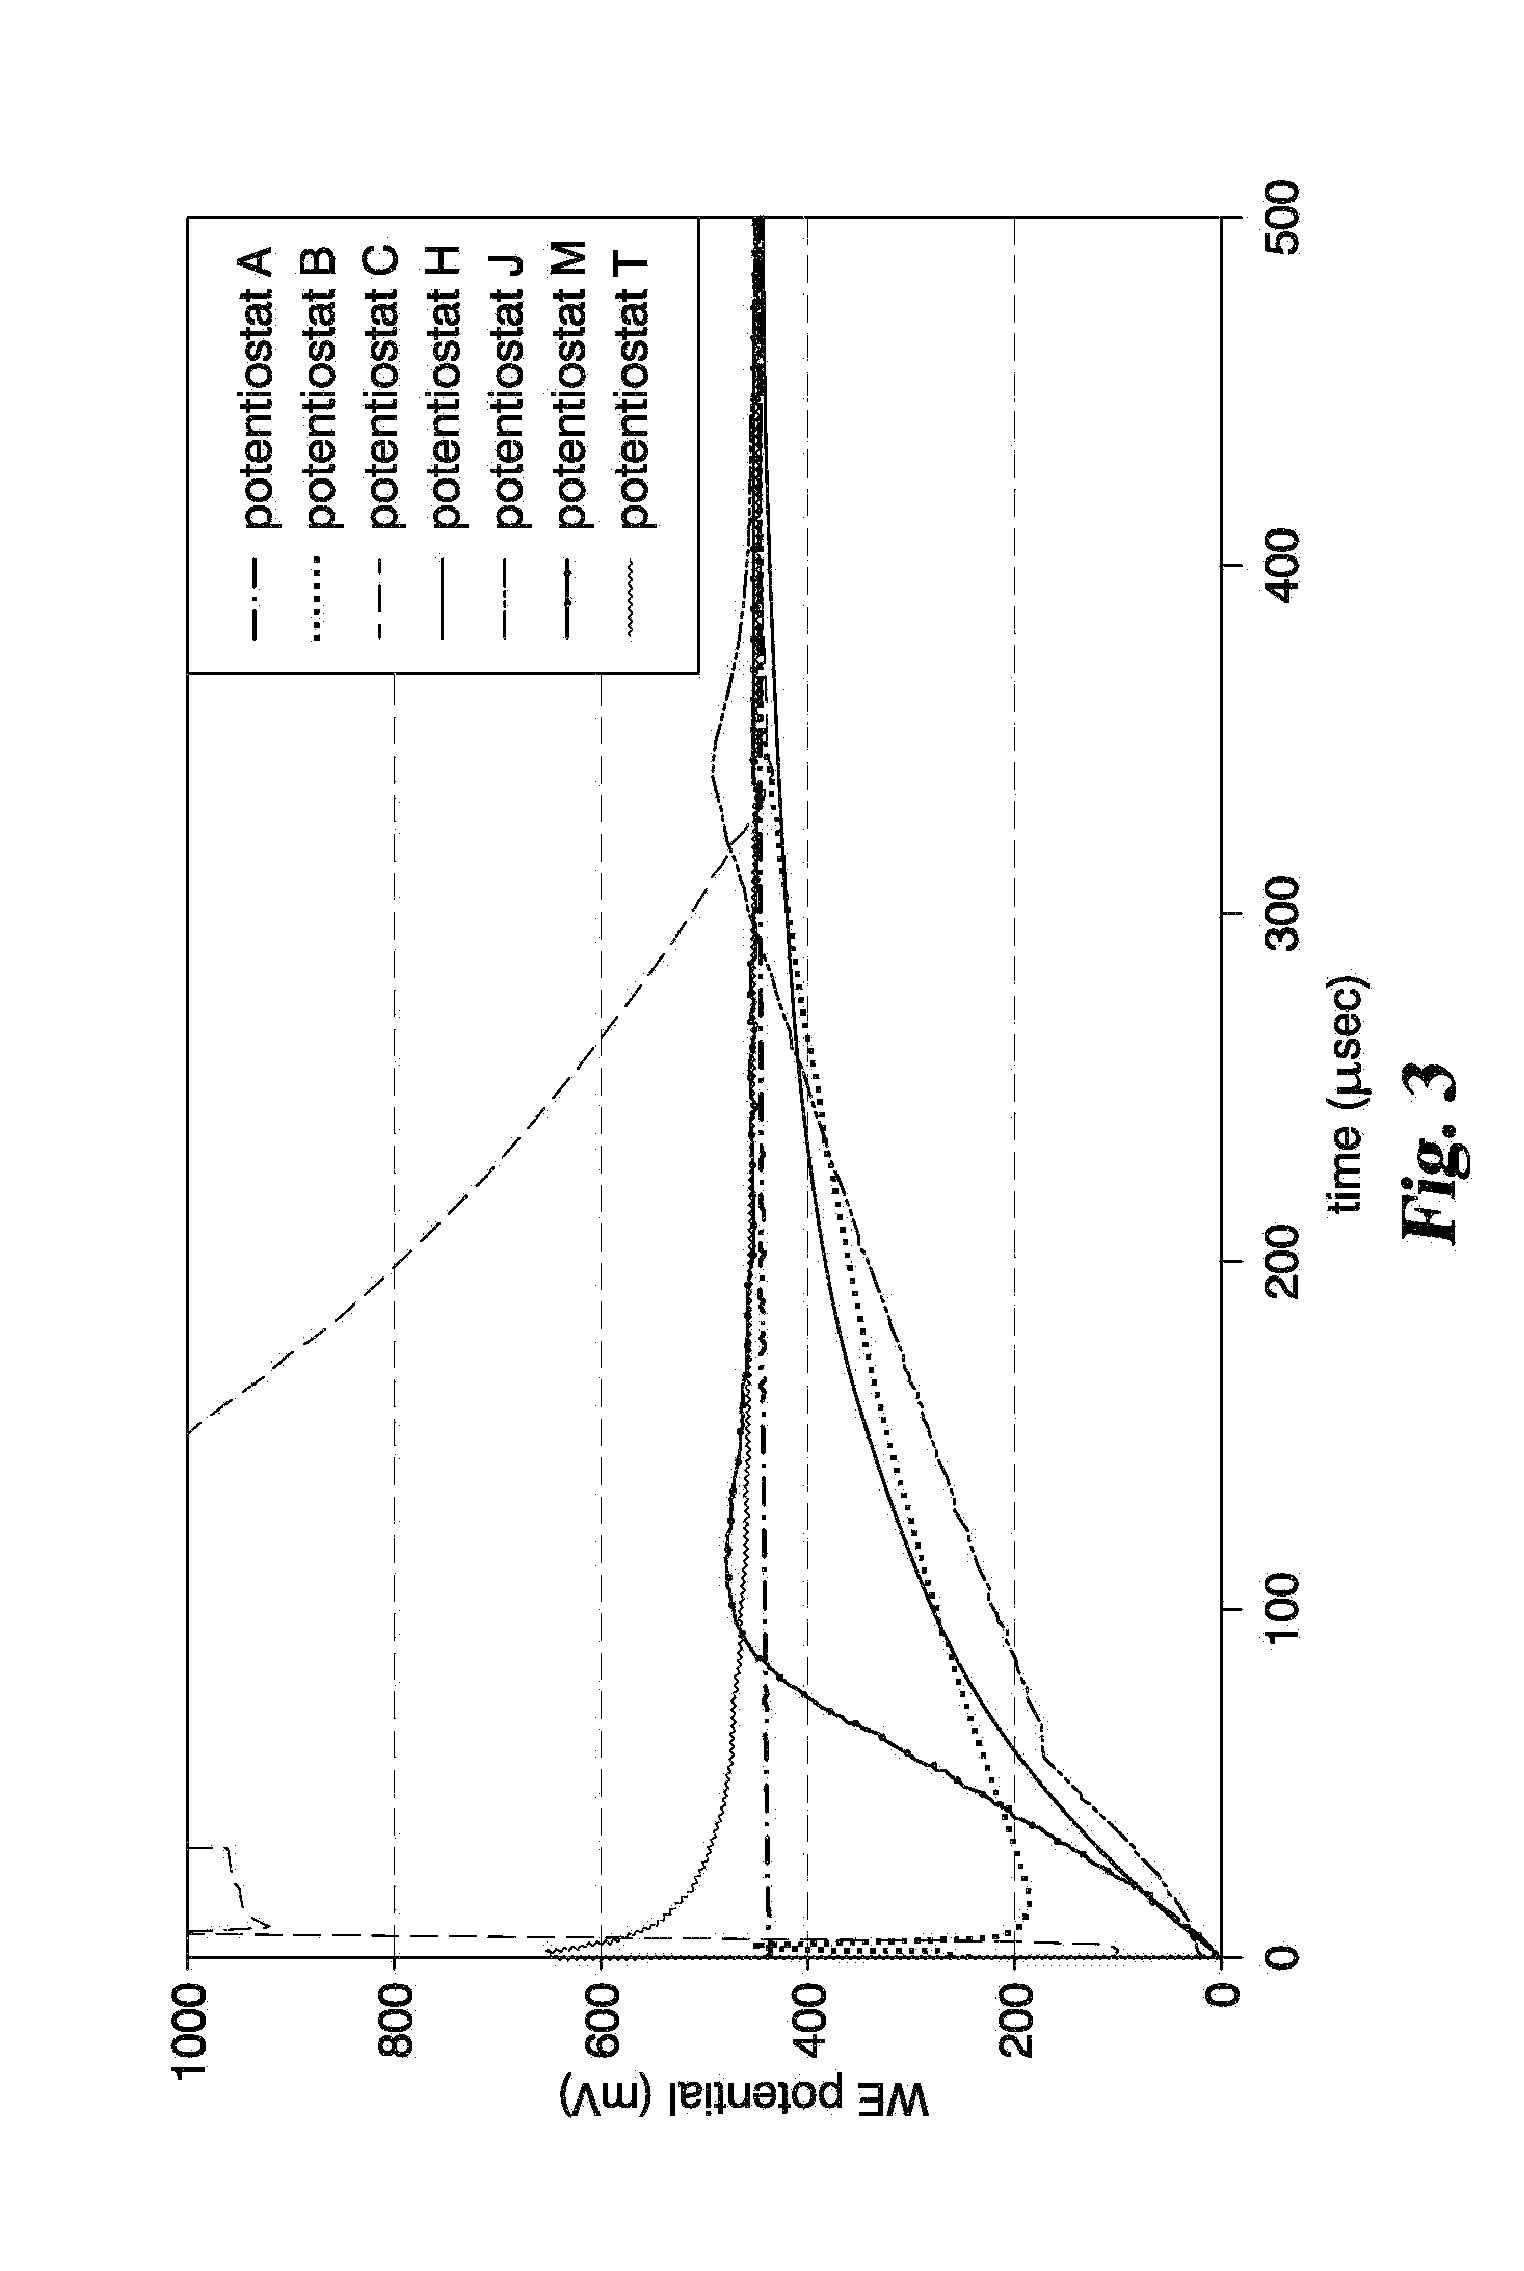 Controlled slew rate transition for electrochemical analysis